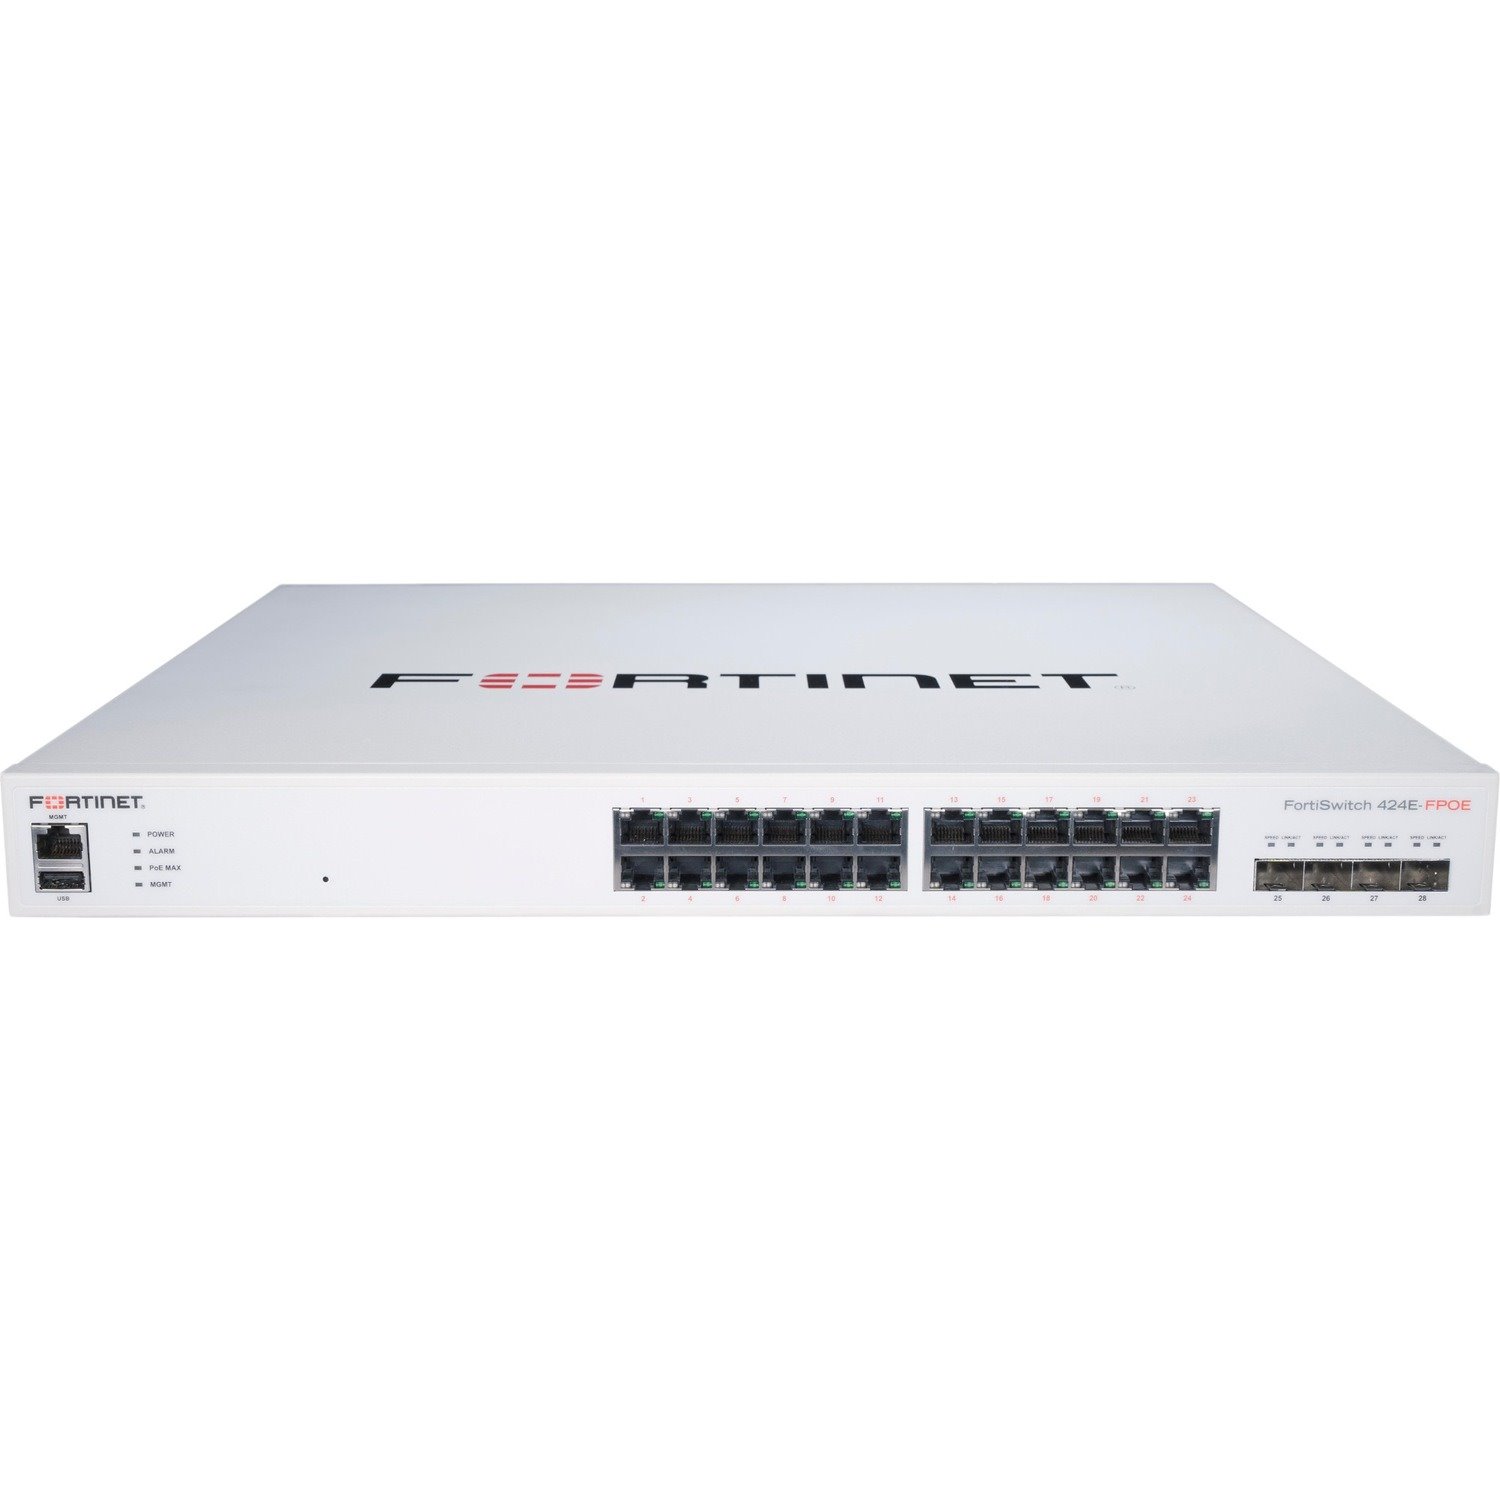 Fortinet FortiSwitch 400 FS-424E-FPOE 24 Ports Manageable Layer 3 Switch